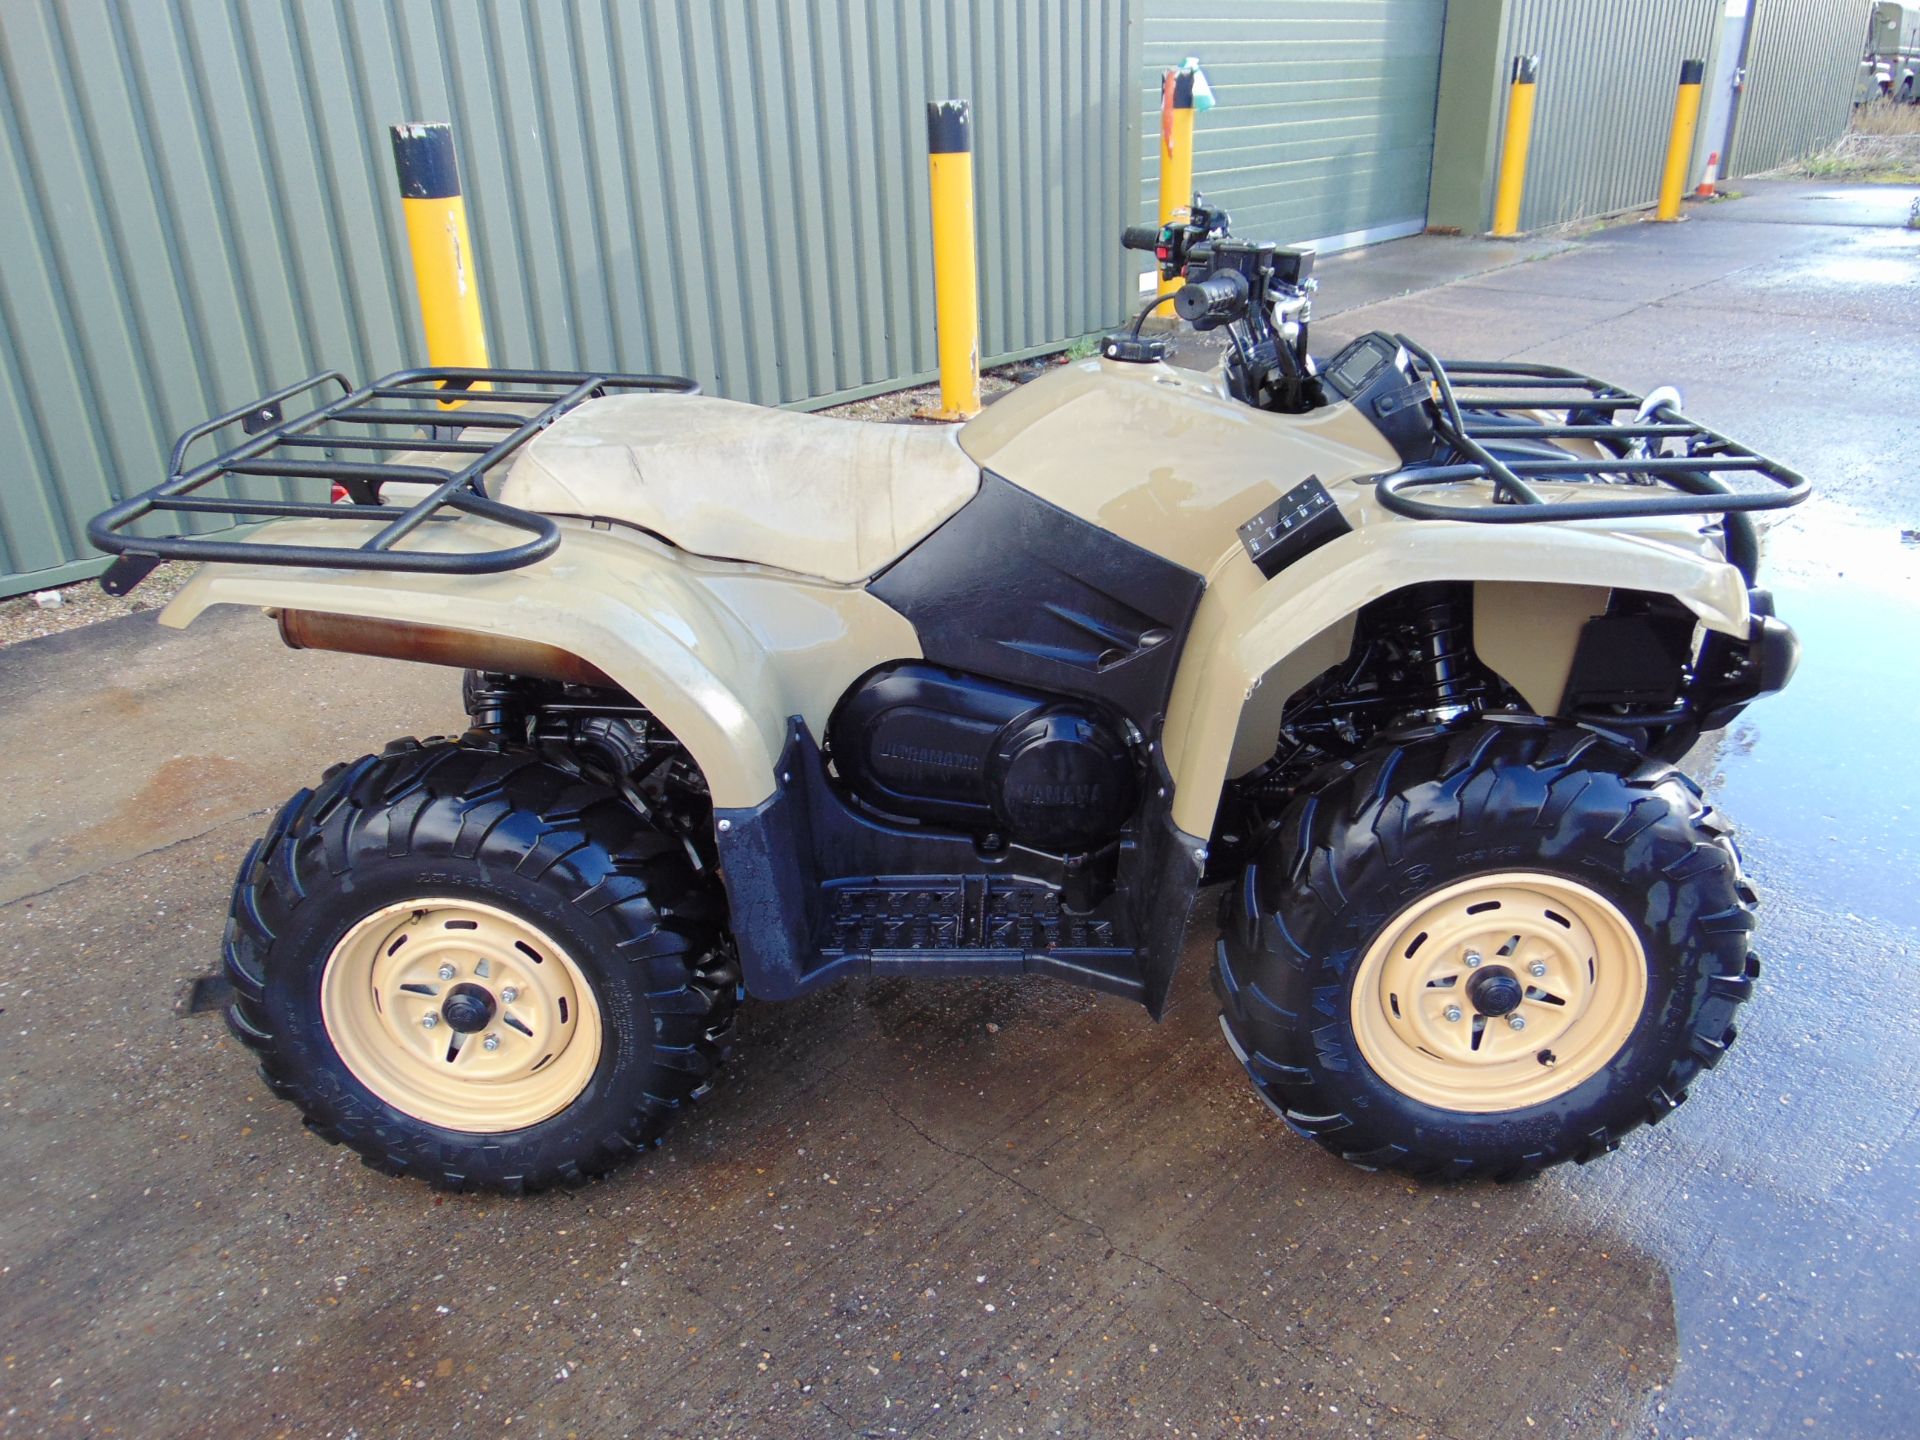 Yamaha Grizzly 450 4 x 4 ATV Quad Bike Complete with Winch ONLY 218 HOURS! - Image 5 of 13